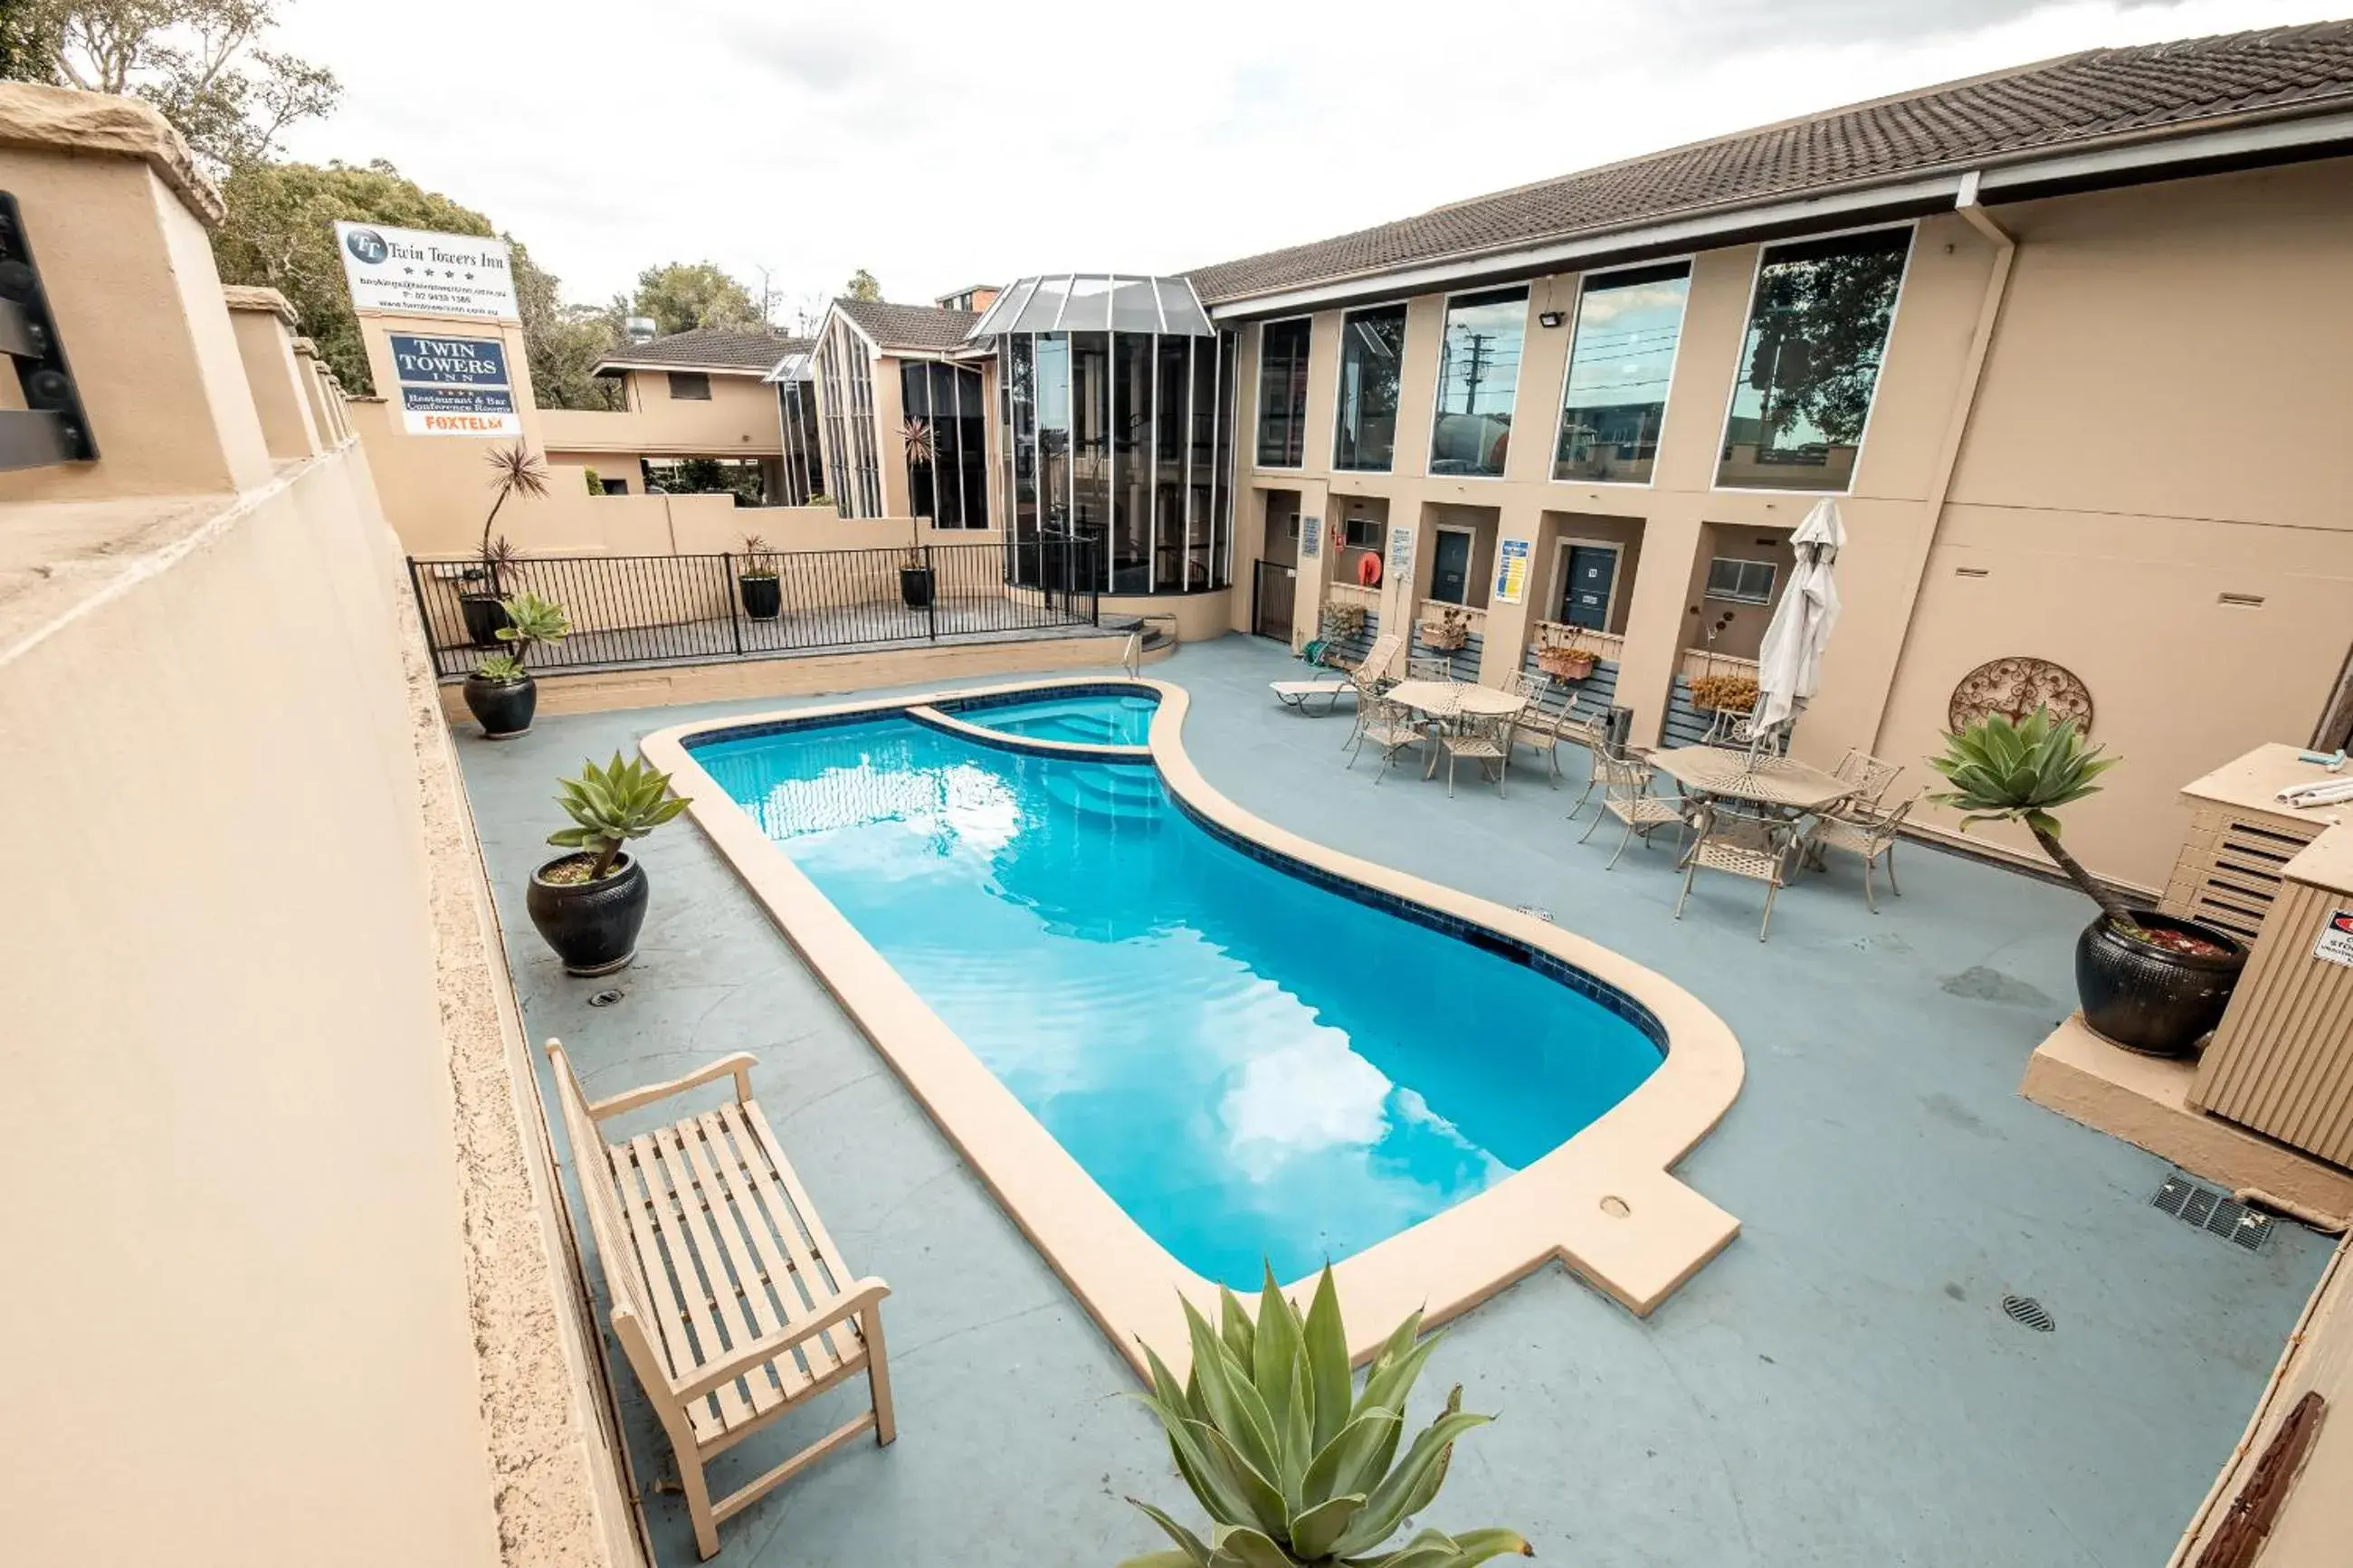 Property building, Pool View in Twin Towers Inn